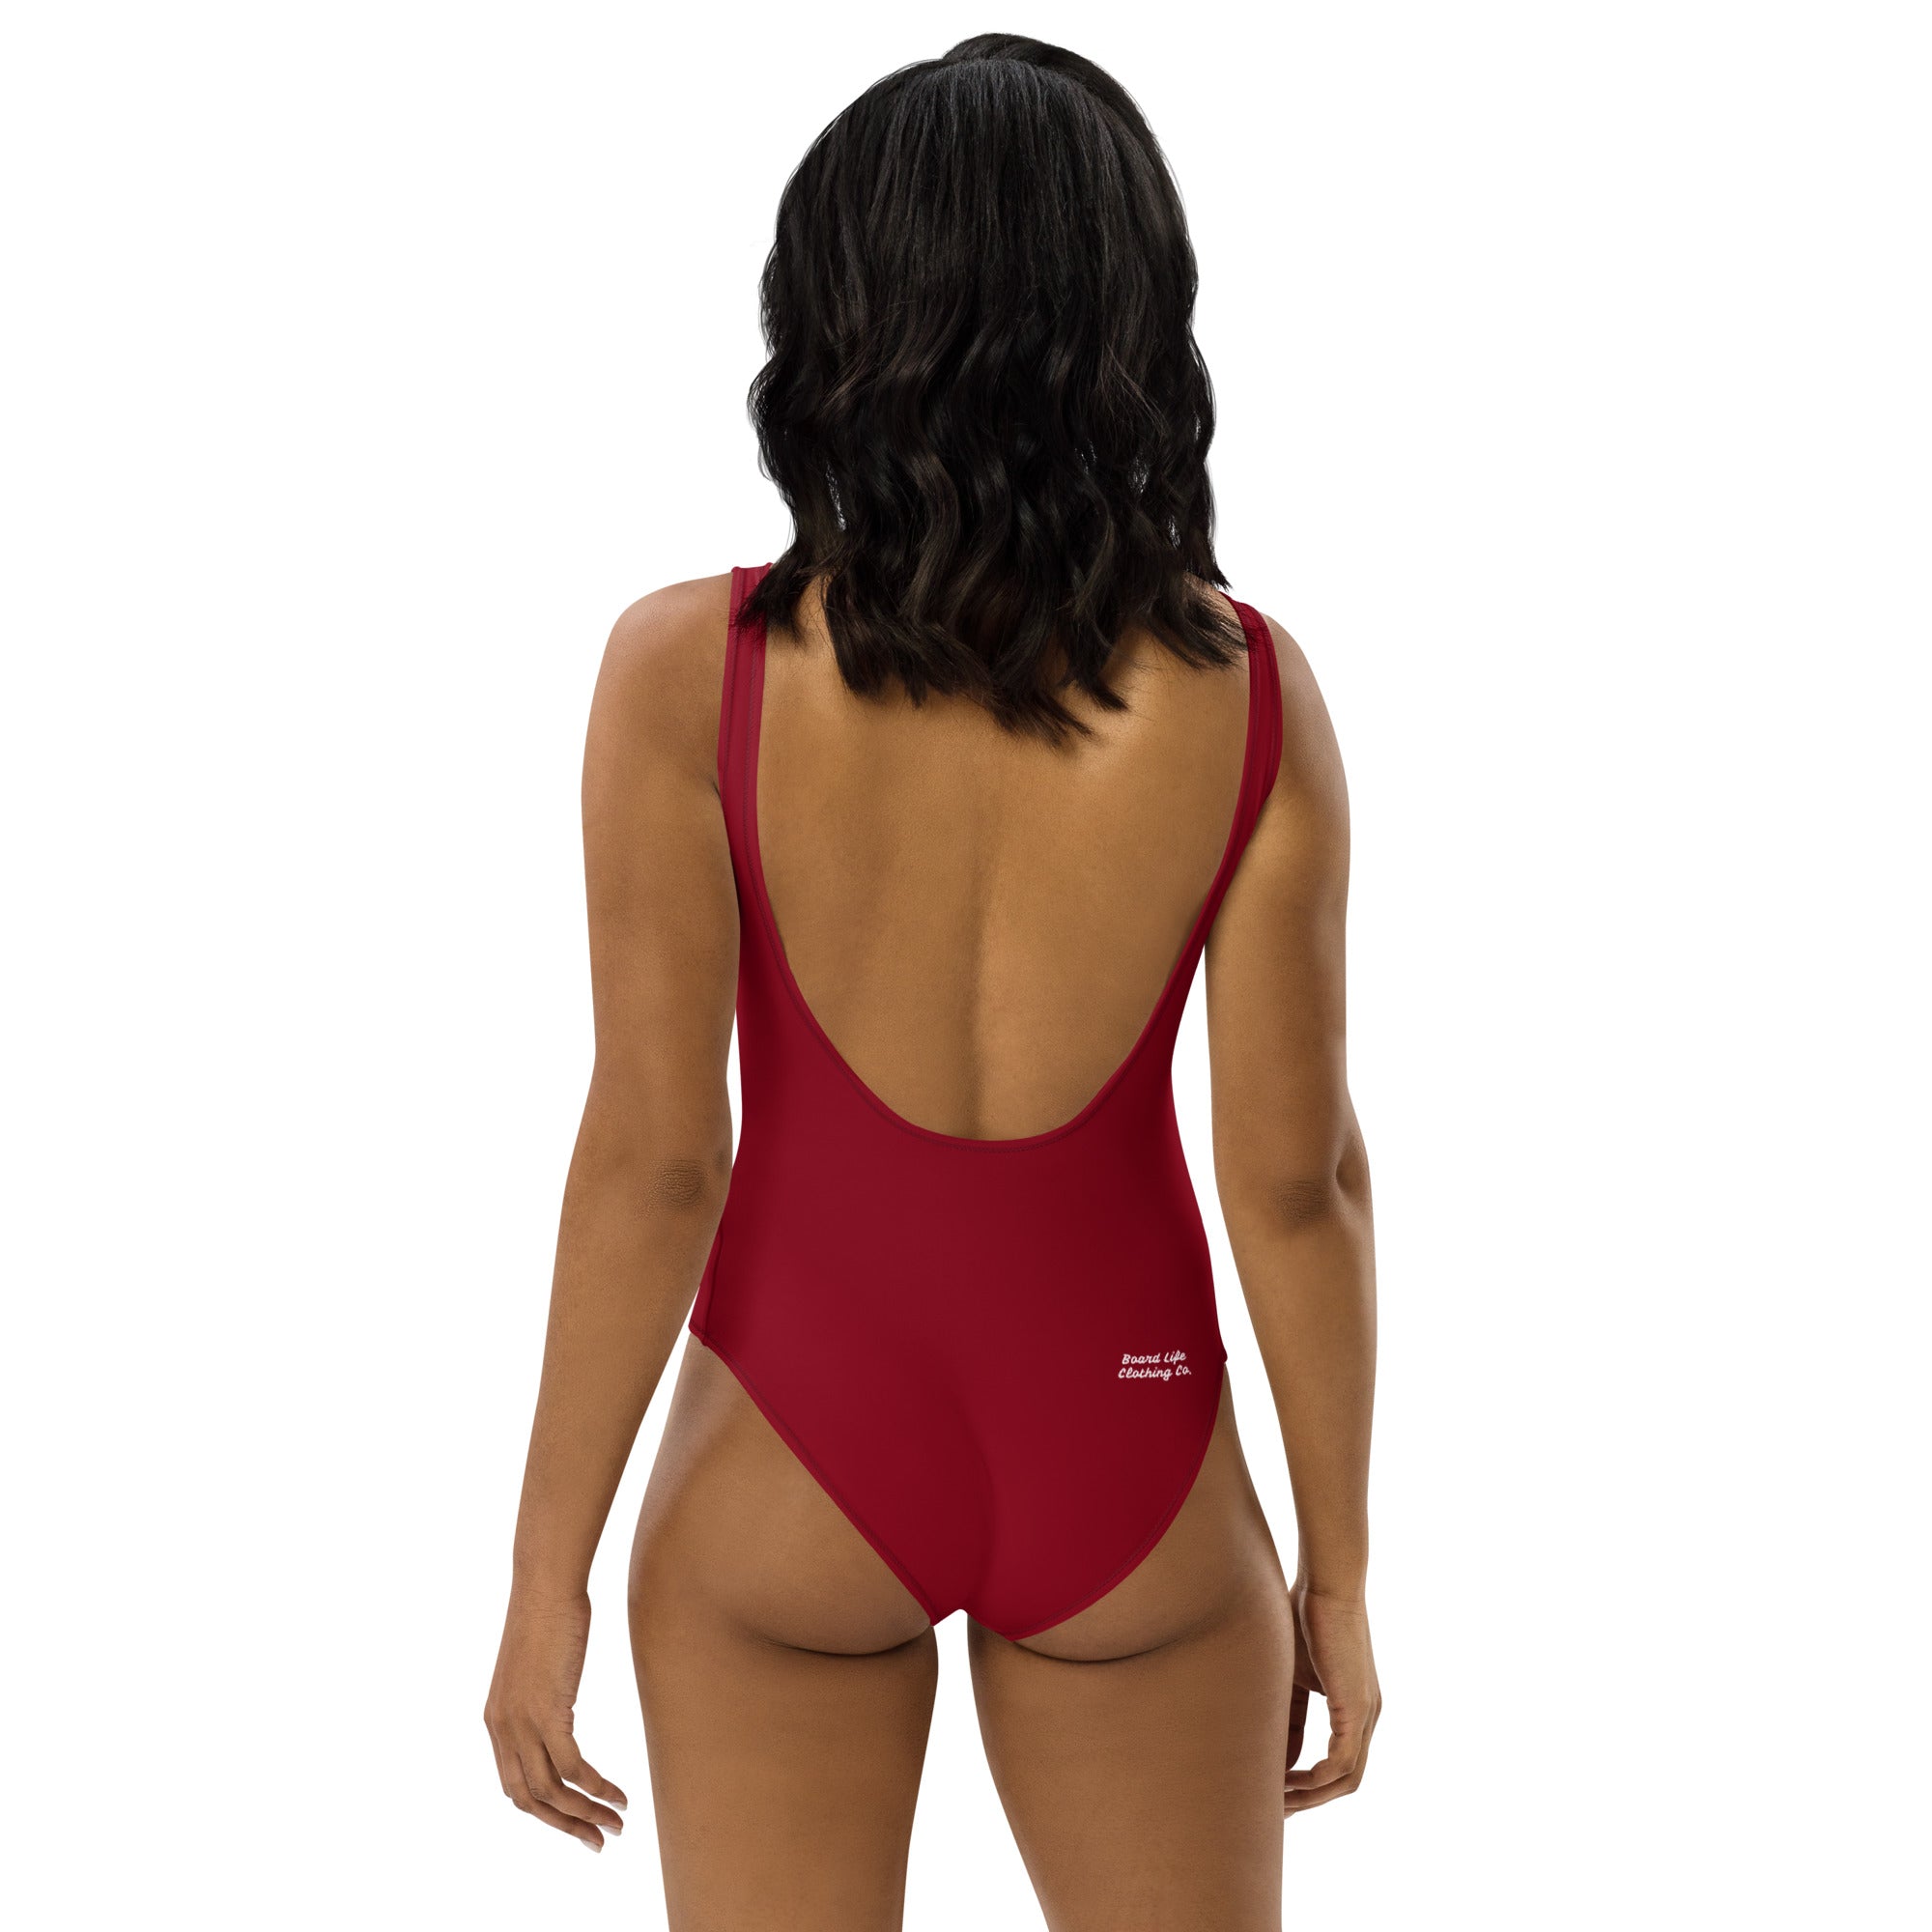 Board Life Safety Red One-Piece Swimsuit